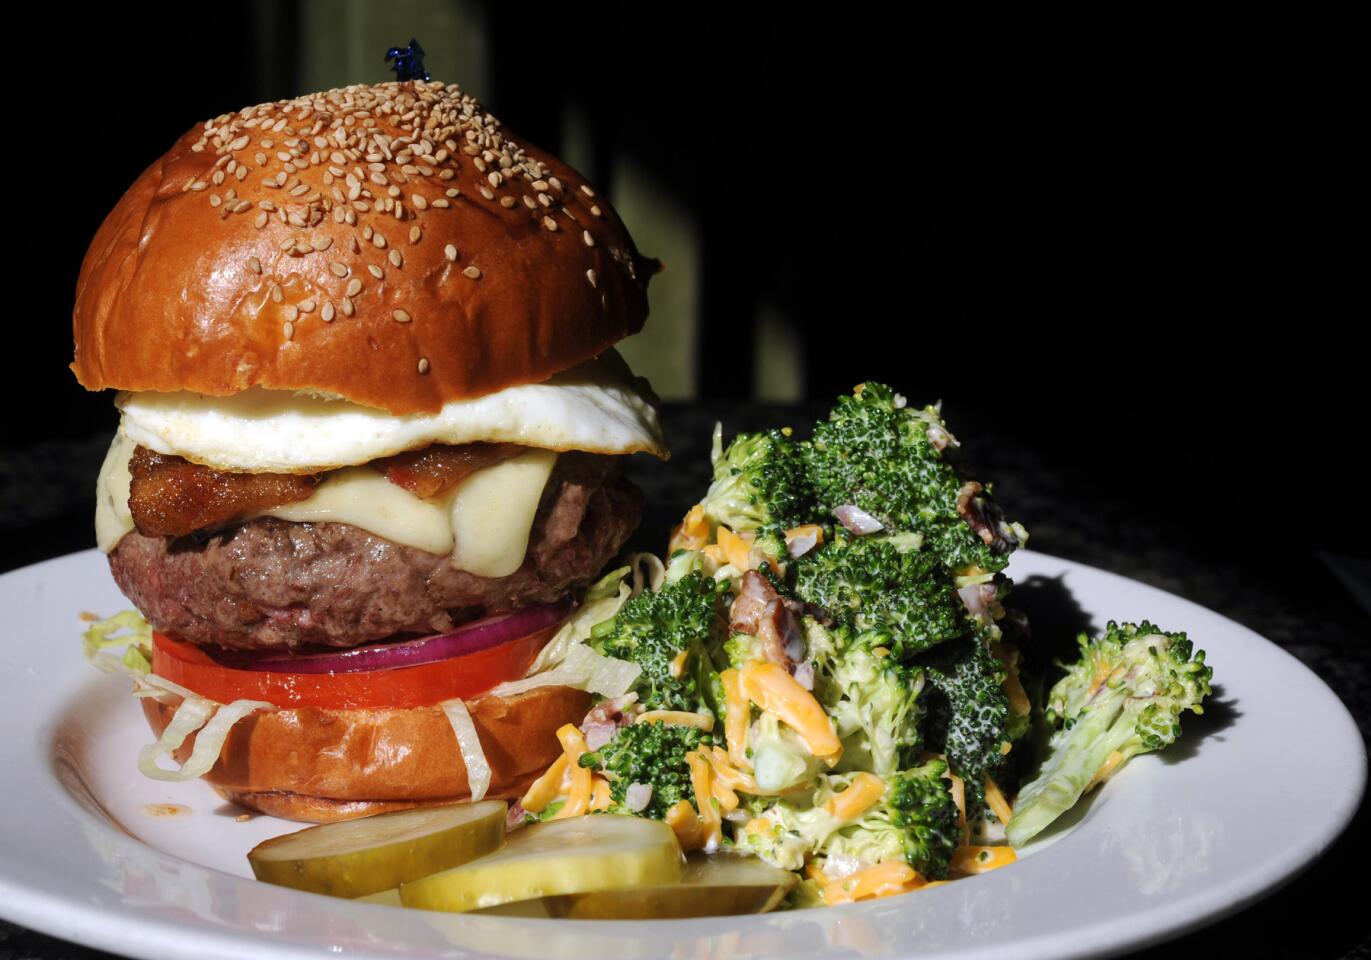 The Harford Road tavern got Maryland's spot in The Best Burger in Every State in America, a March 2015 Thrillist online feature.